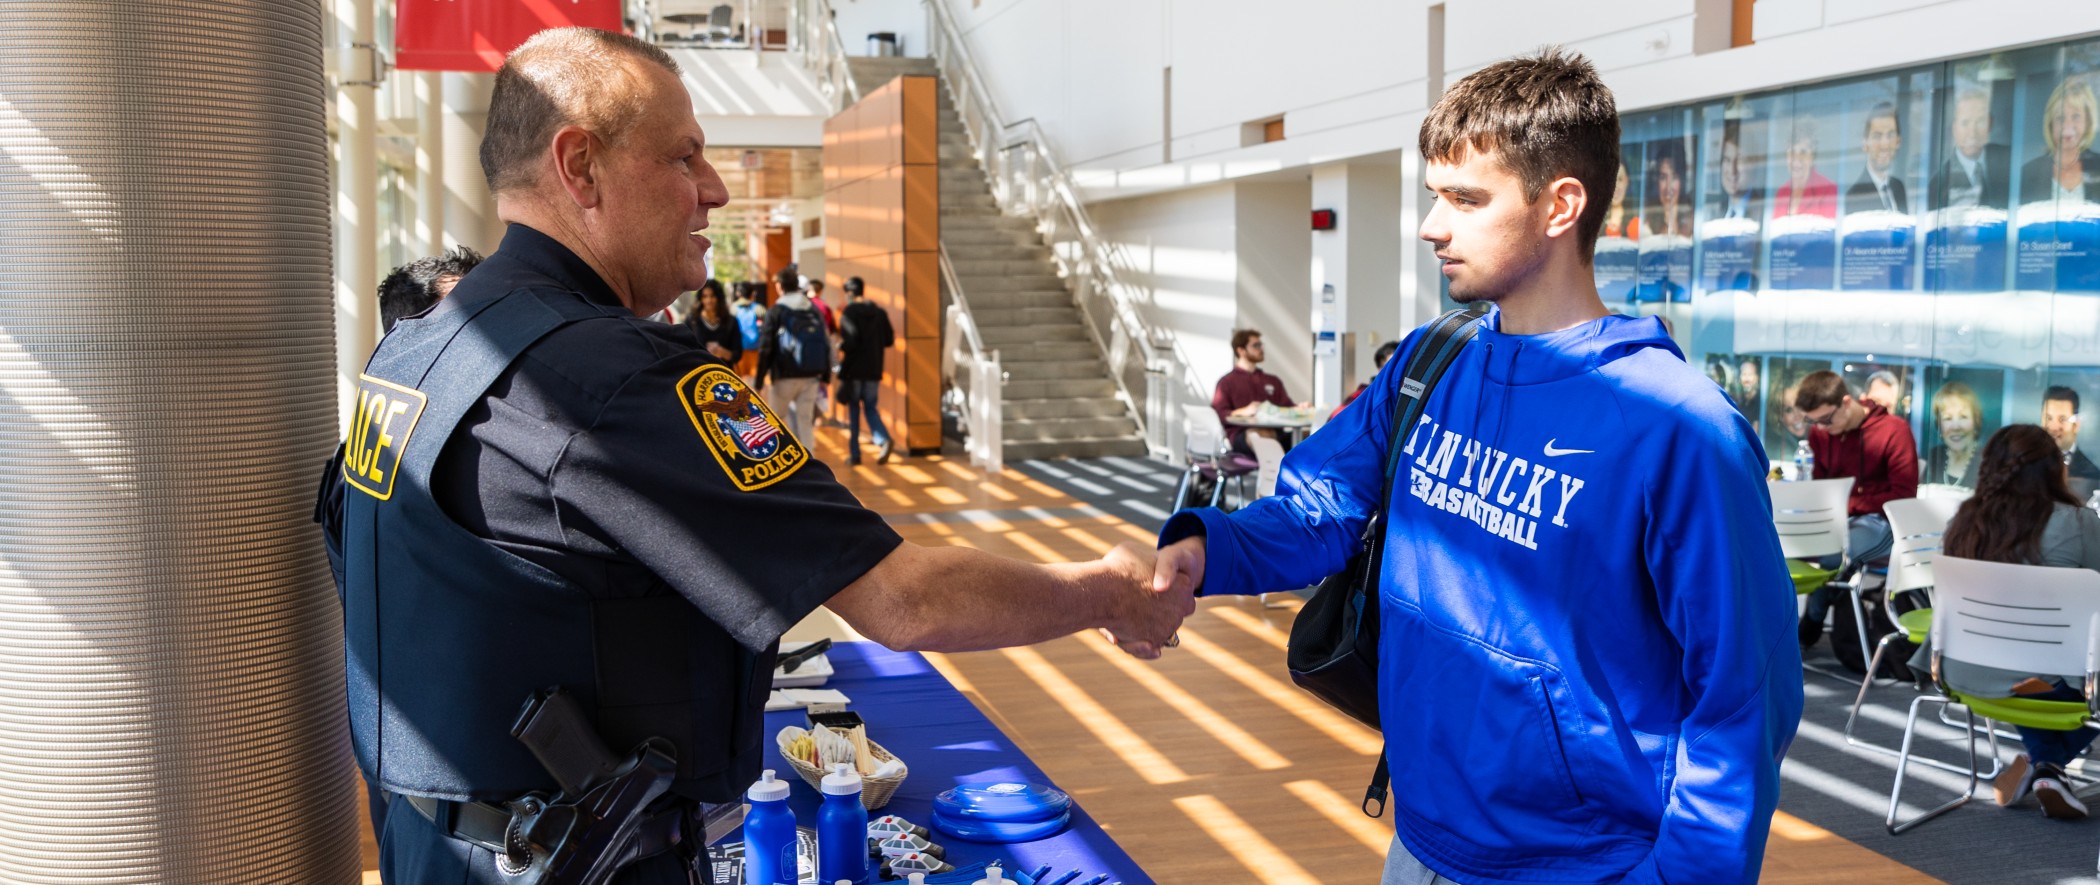 Police officer shaking hands with student